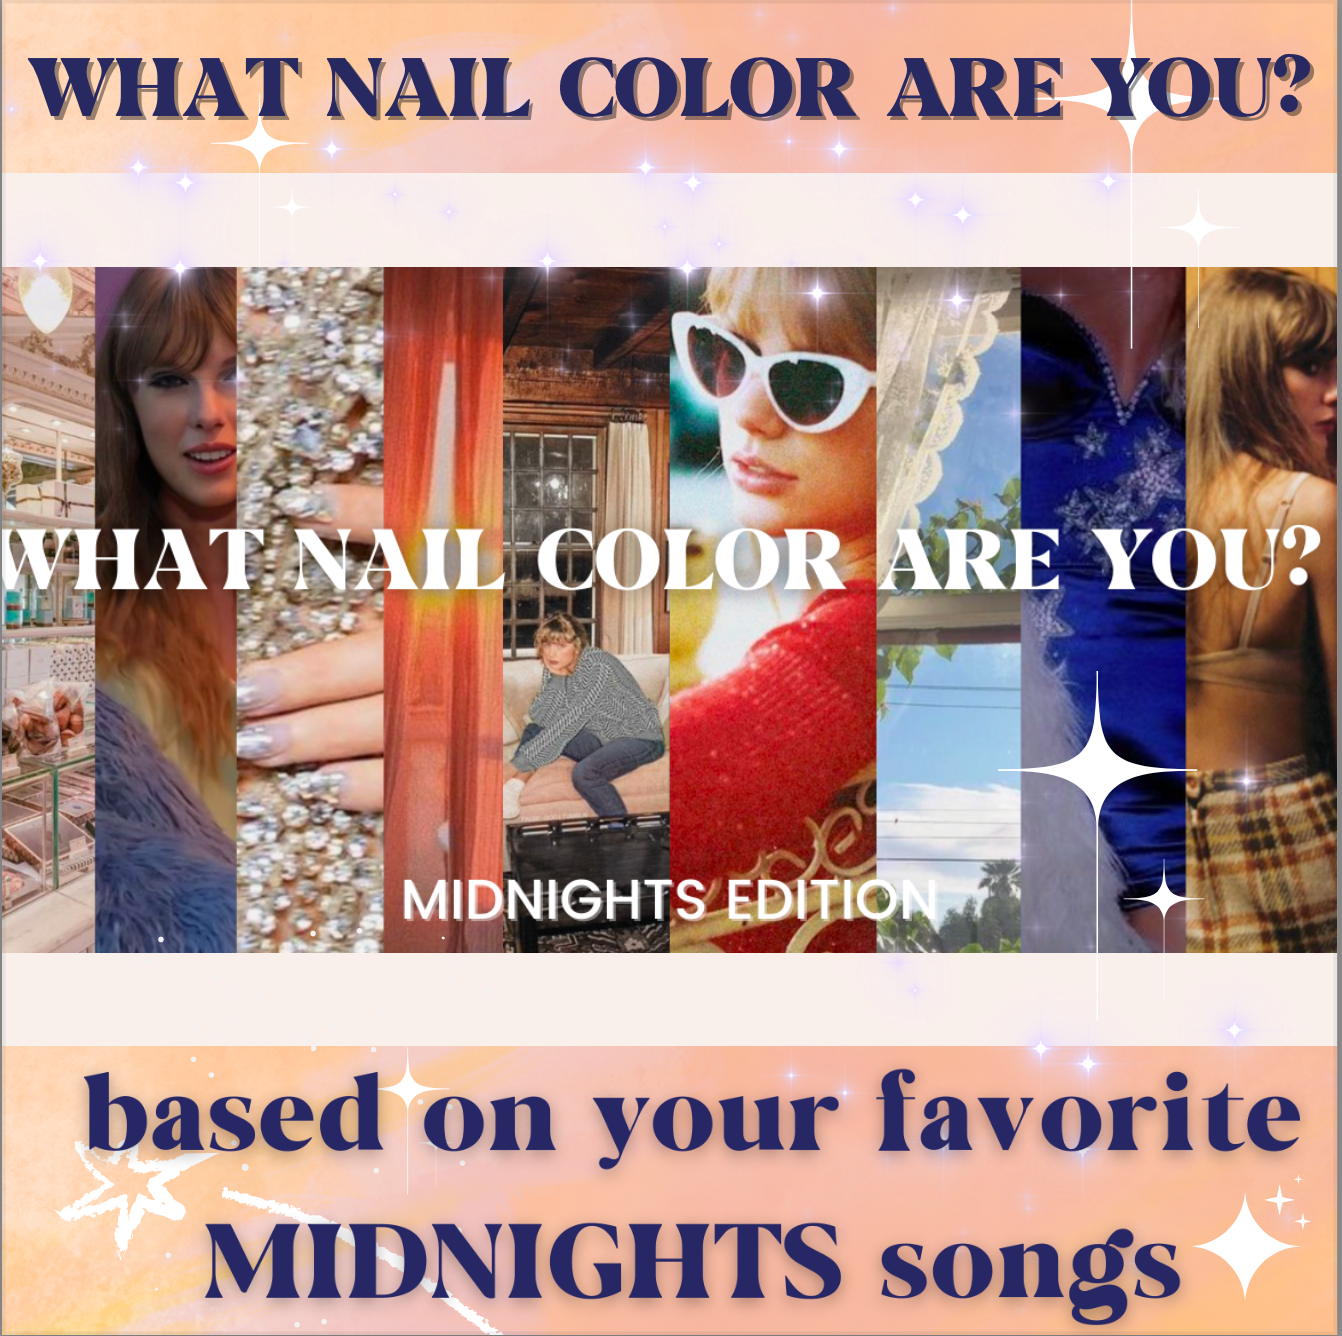 WHAT NAIL COLOR YOU SHOULD WEAR BASED ON YOUR FAVE TAYLOR SWIFT MIDNIGHTS SONG